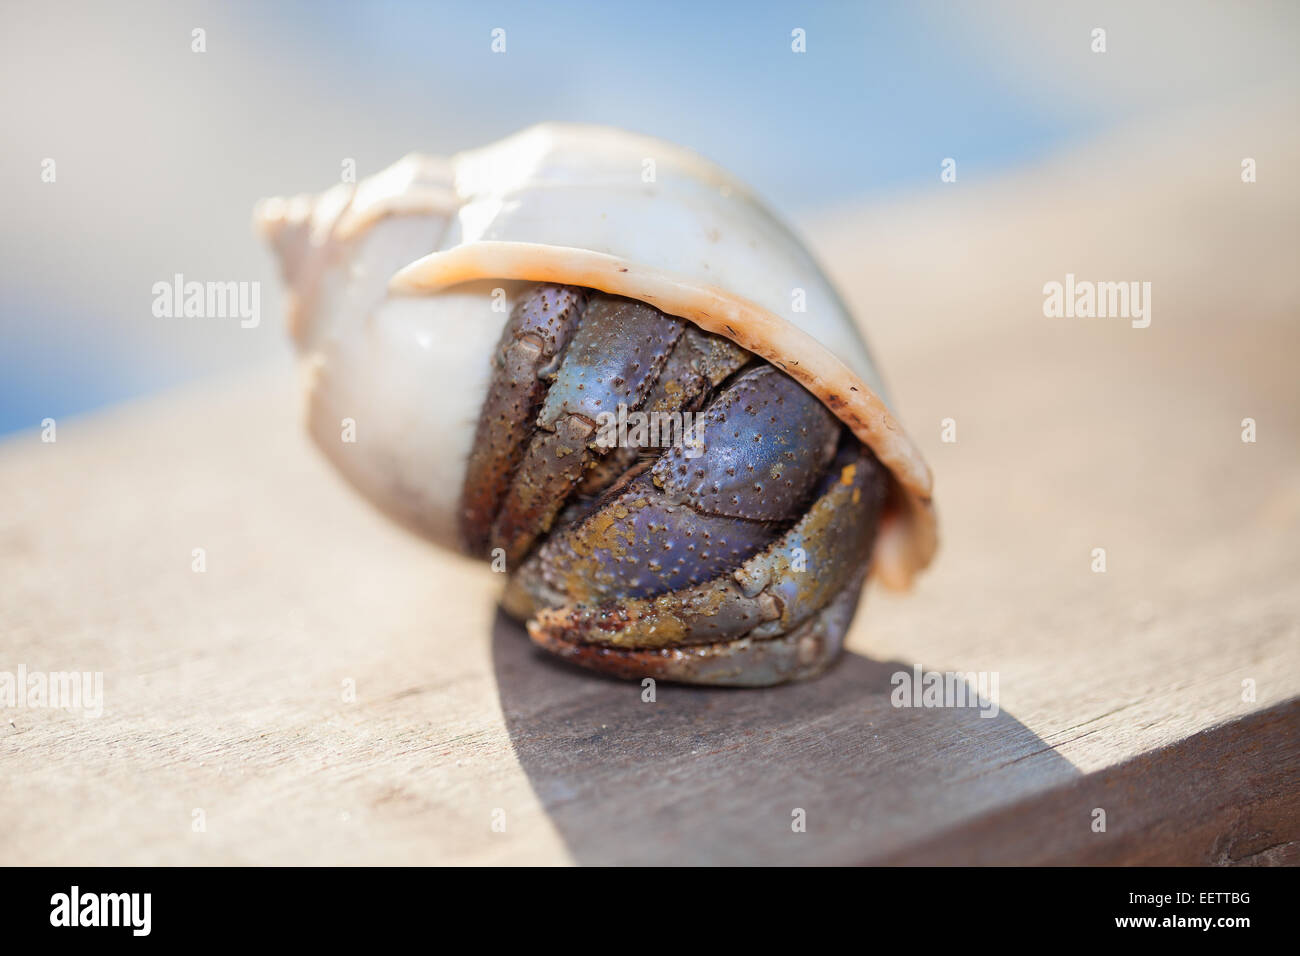 Closeup of a hermit crab in spiral shell on blurred background Stock Photo